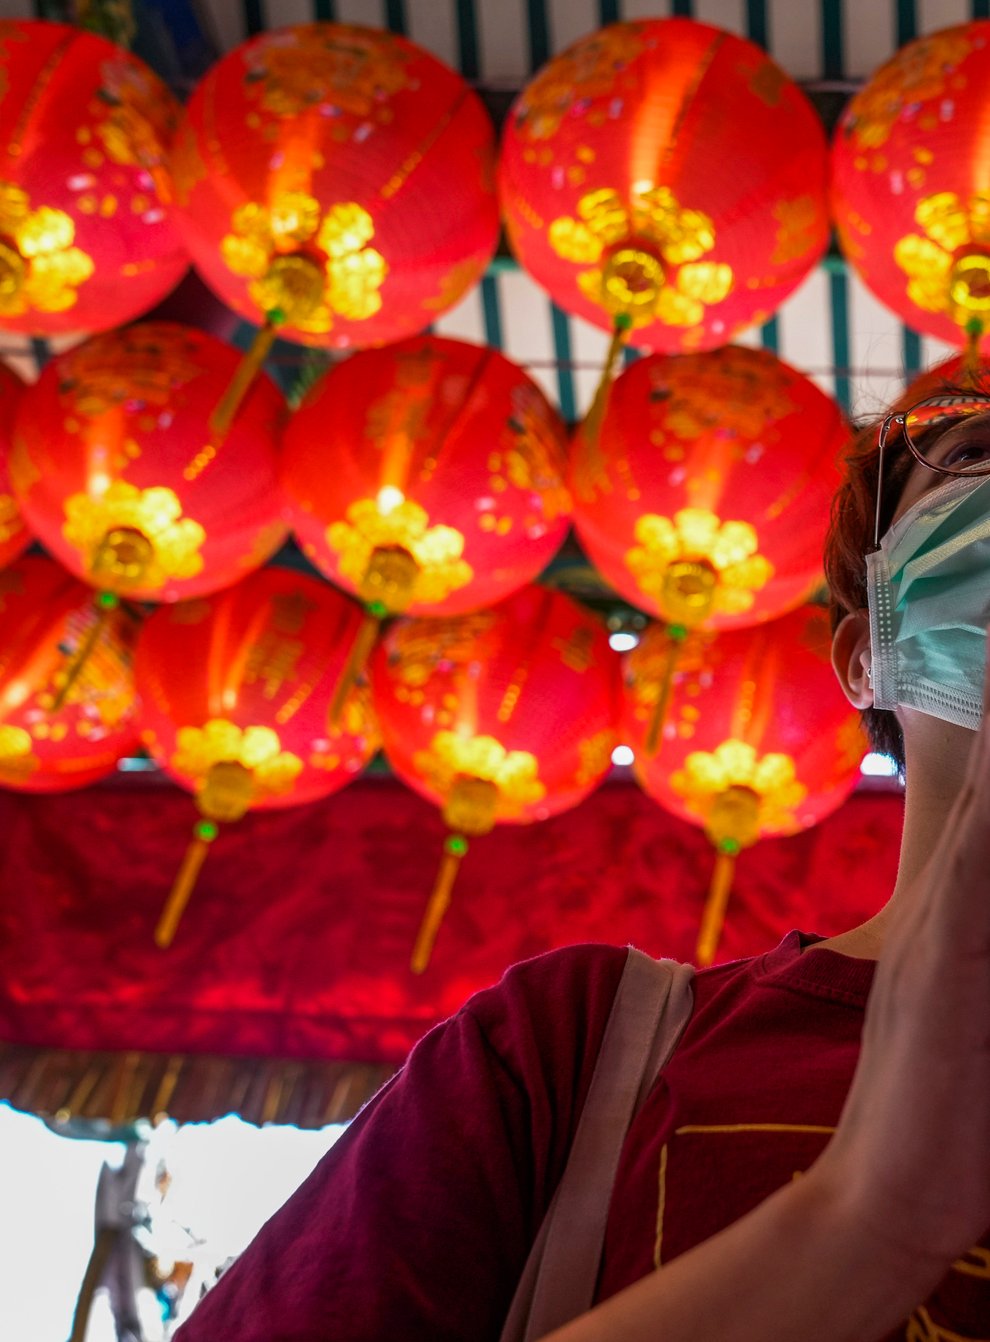 A person in Thailand prays for good fortune on the eve of the Lunar New Year (Sakchai Lalit/AP)